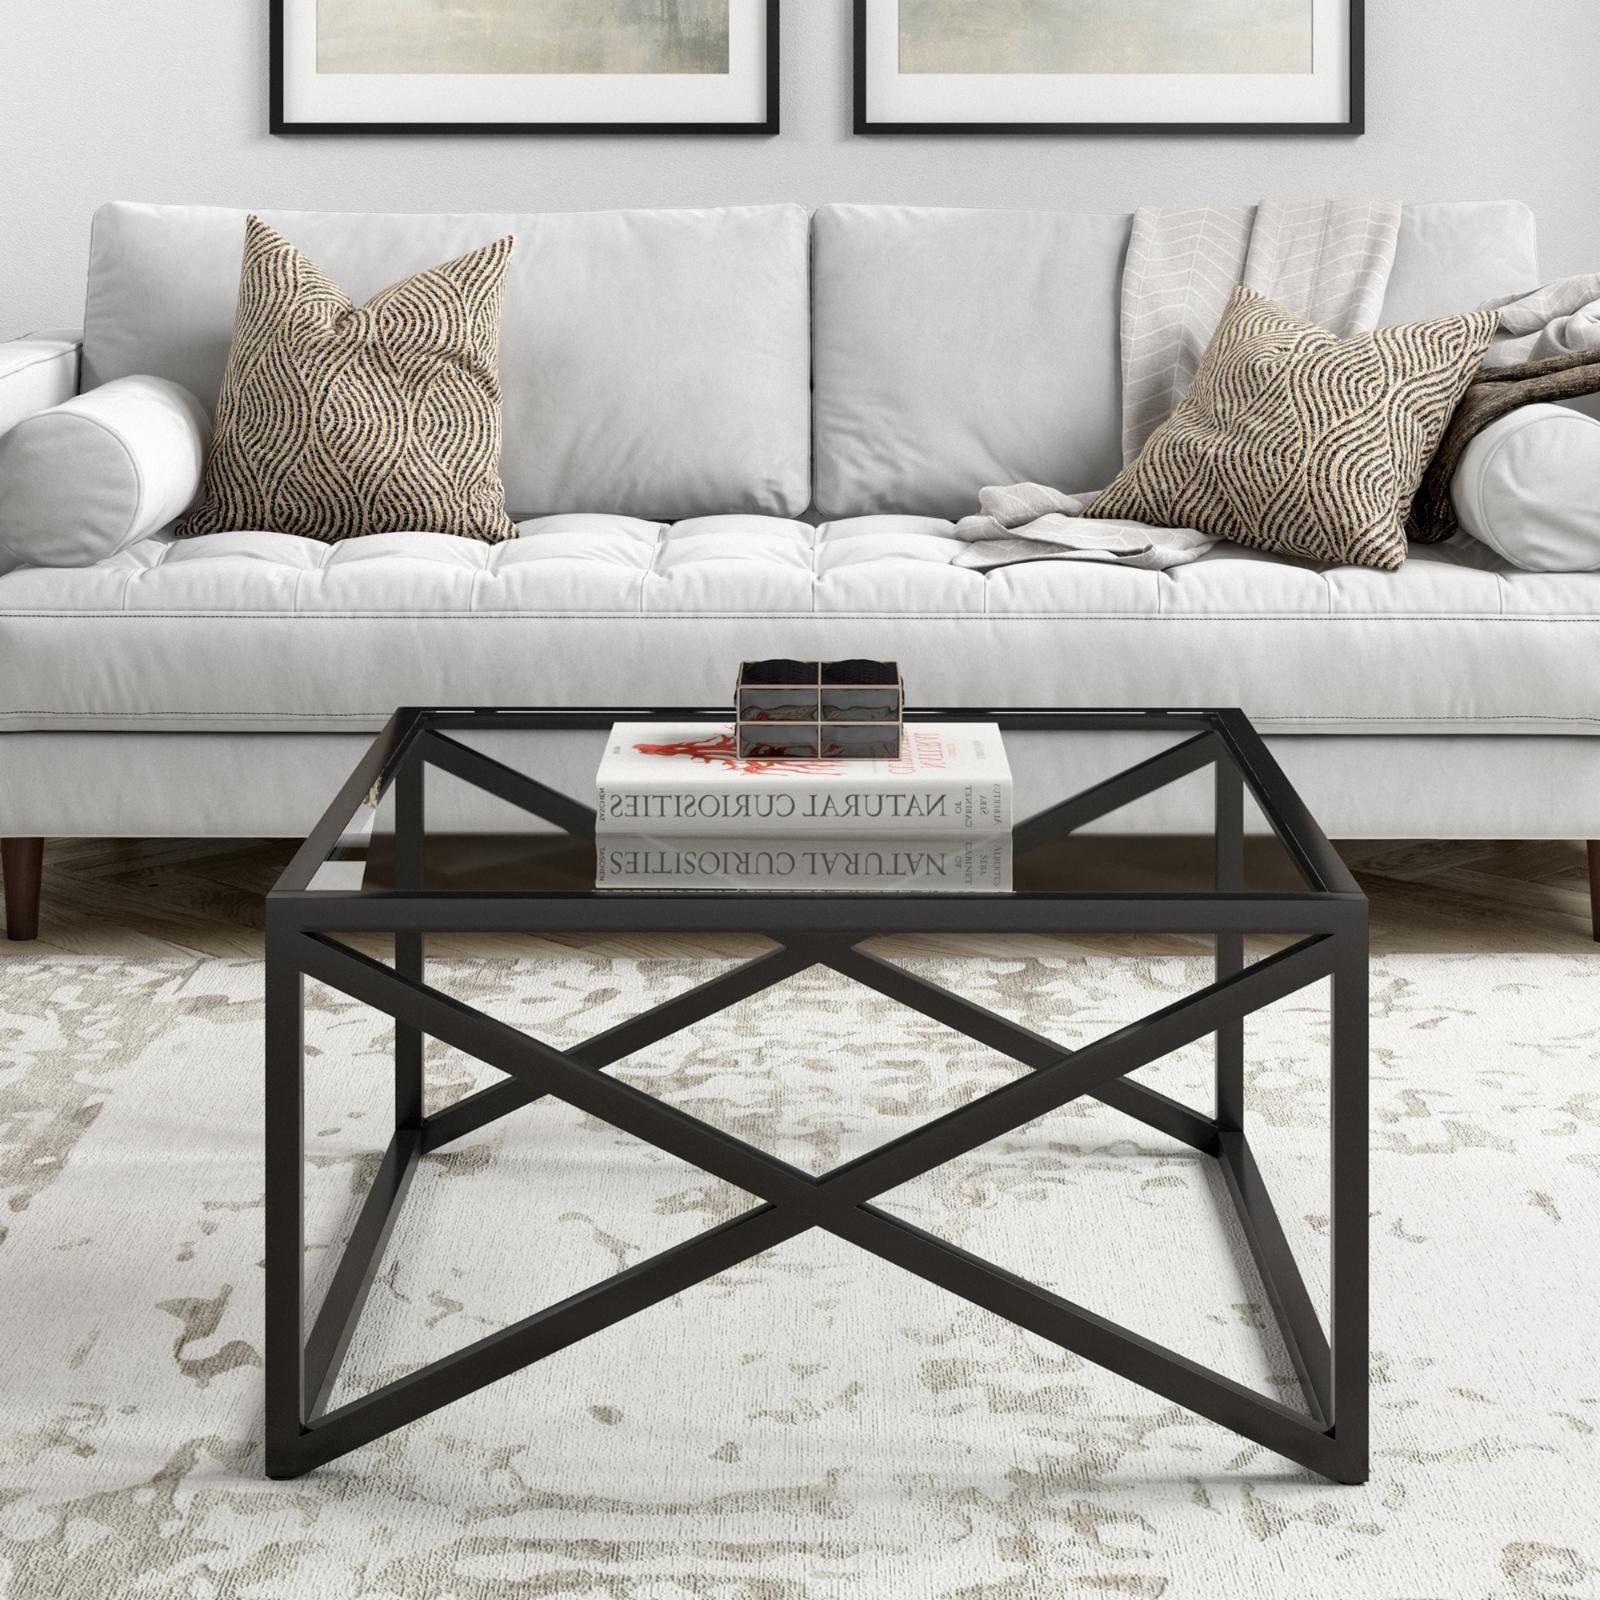 Addison&lane Calix Square Coffee Table – Walmart With Regard To Widely Used Addison&lane Calix Square Tables (View 4 of 10)